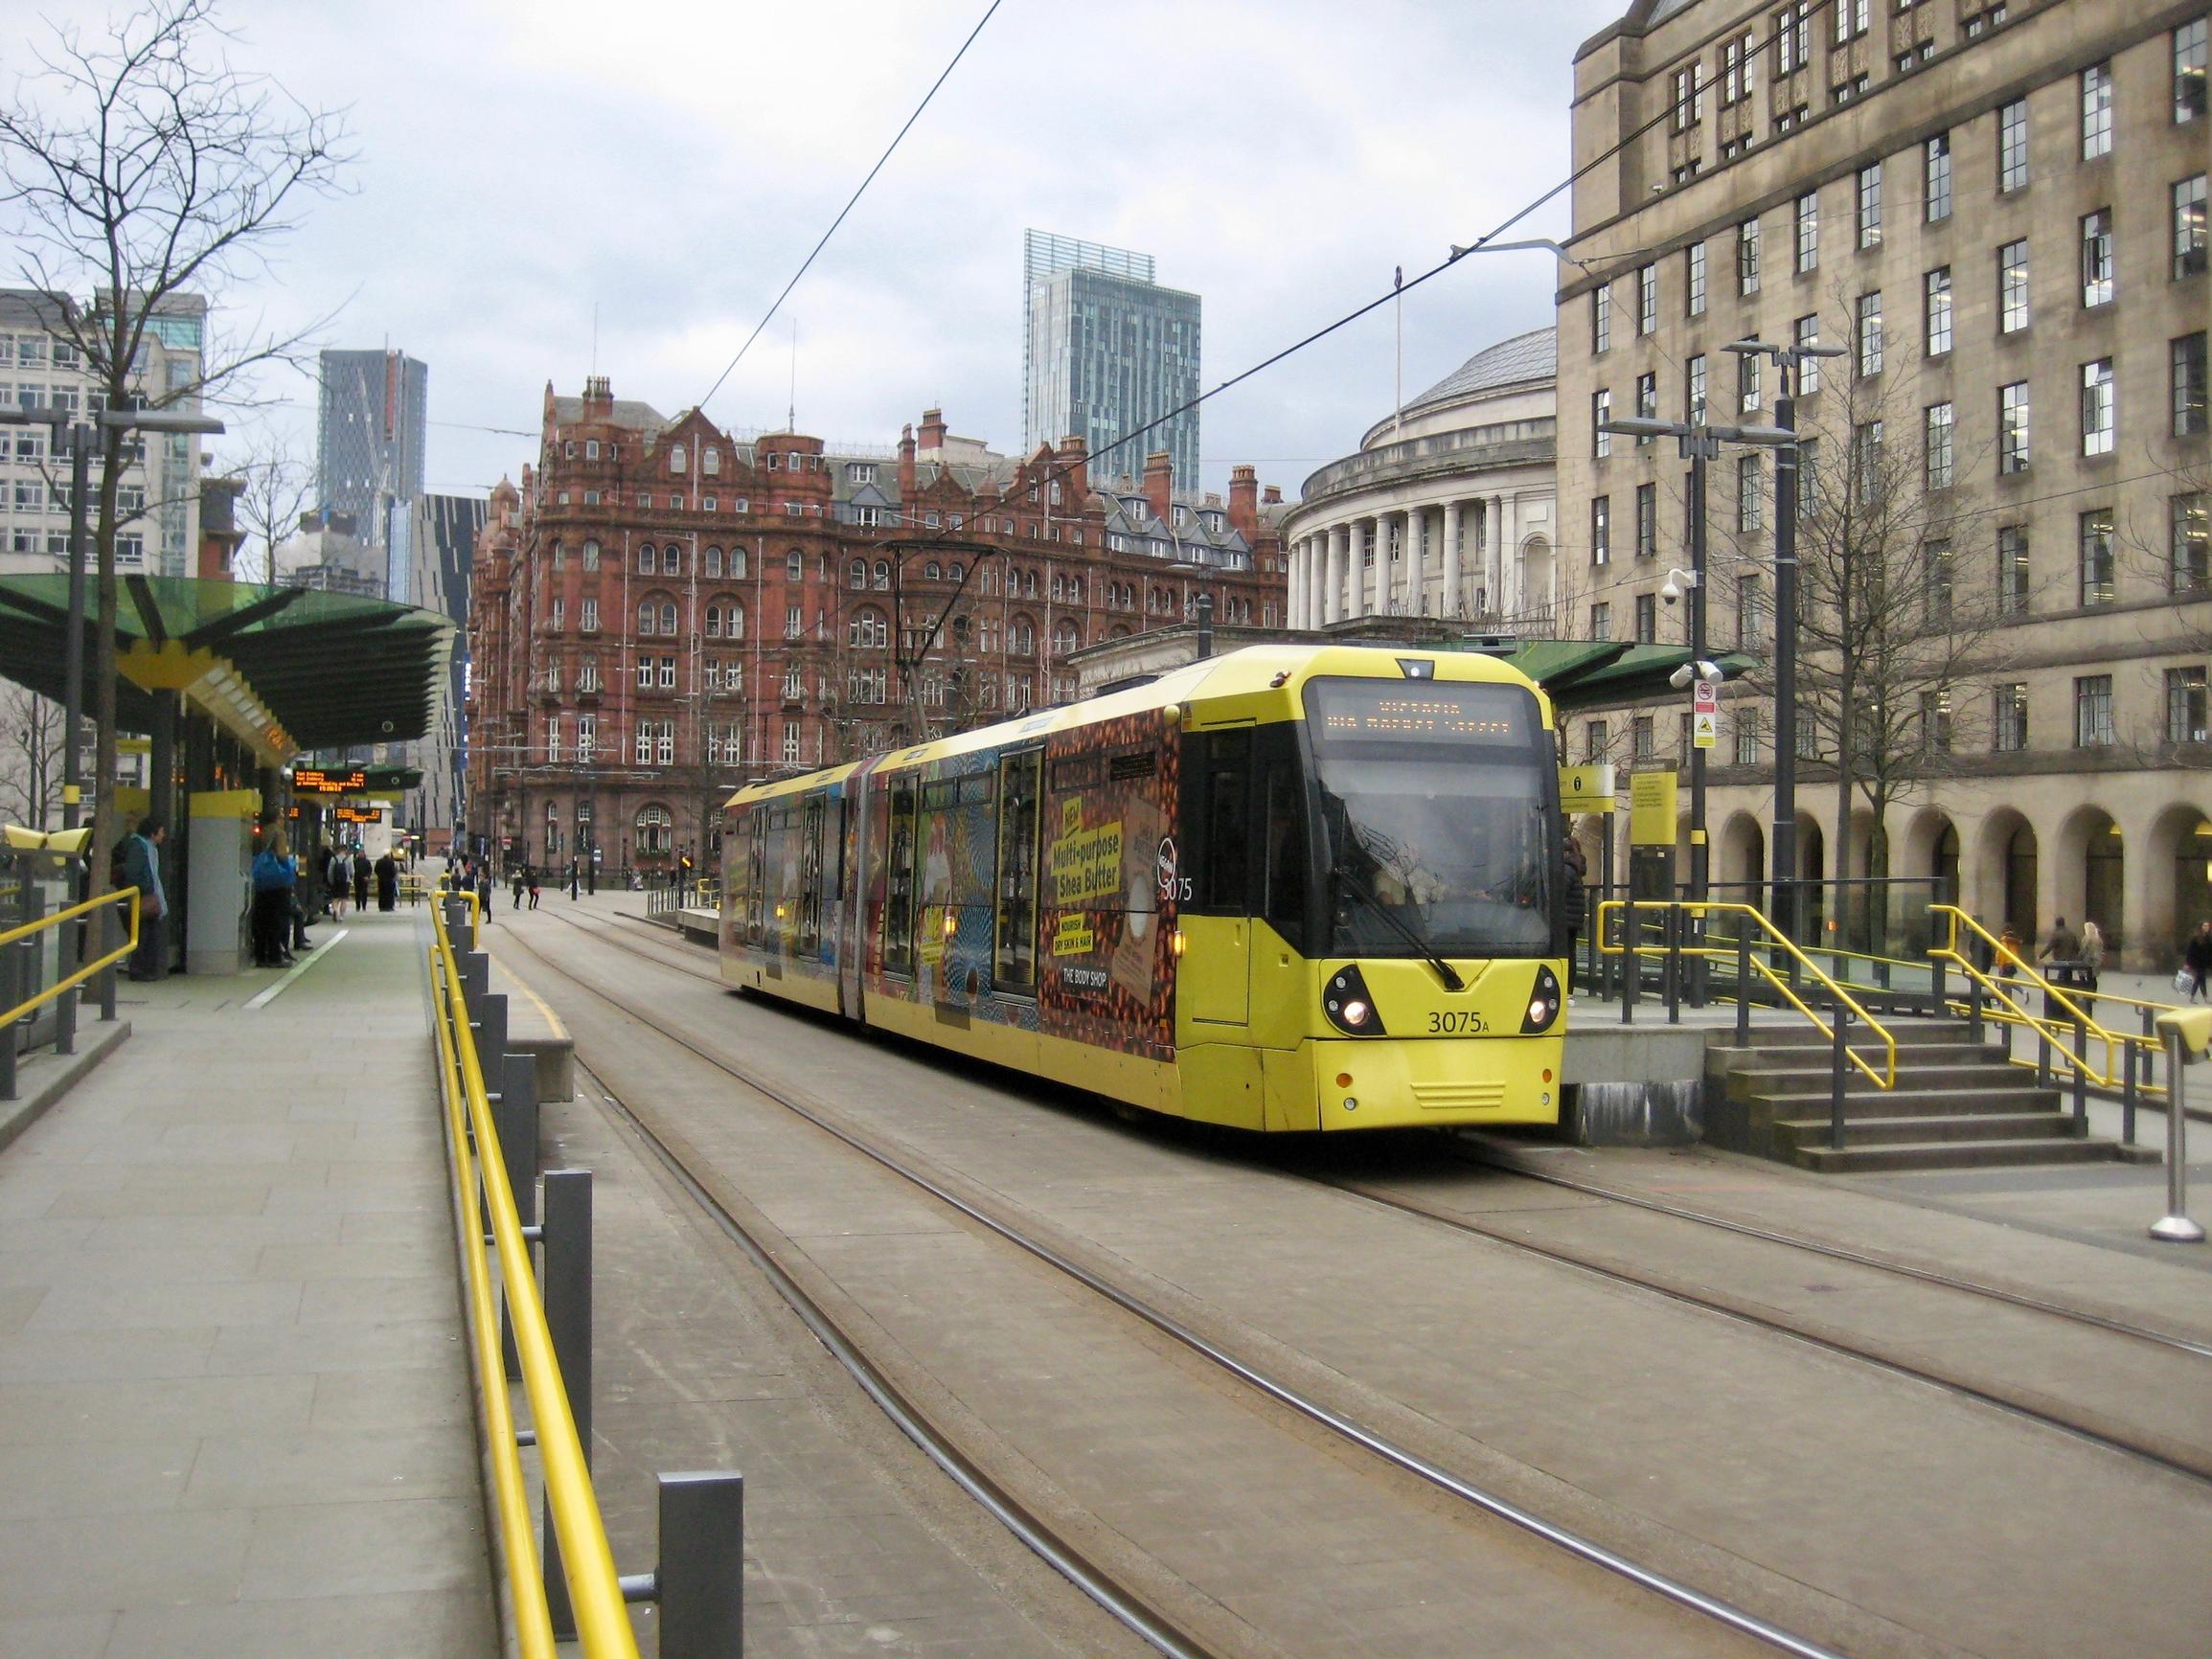 Metrolink: patronage now at 35-40 per cent of pre-Covid levels